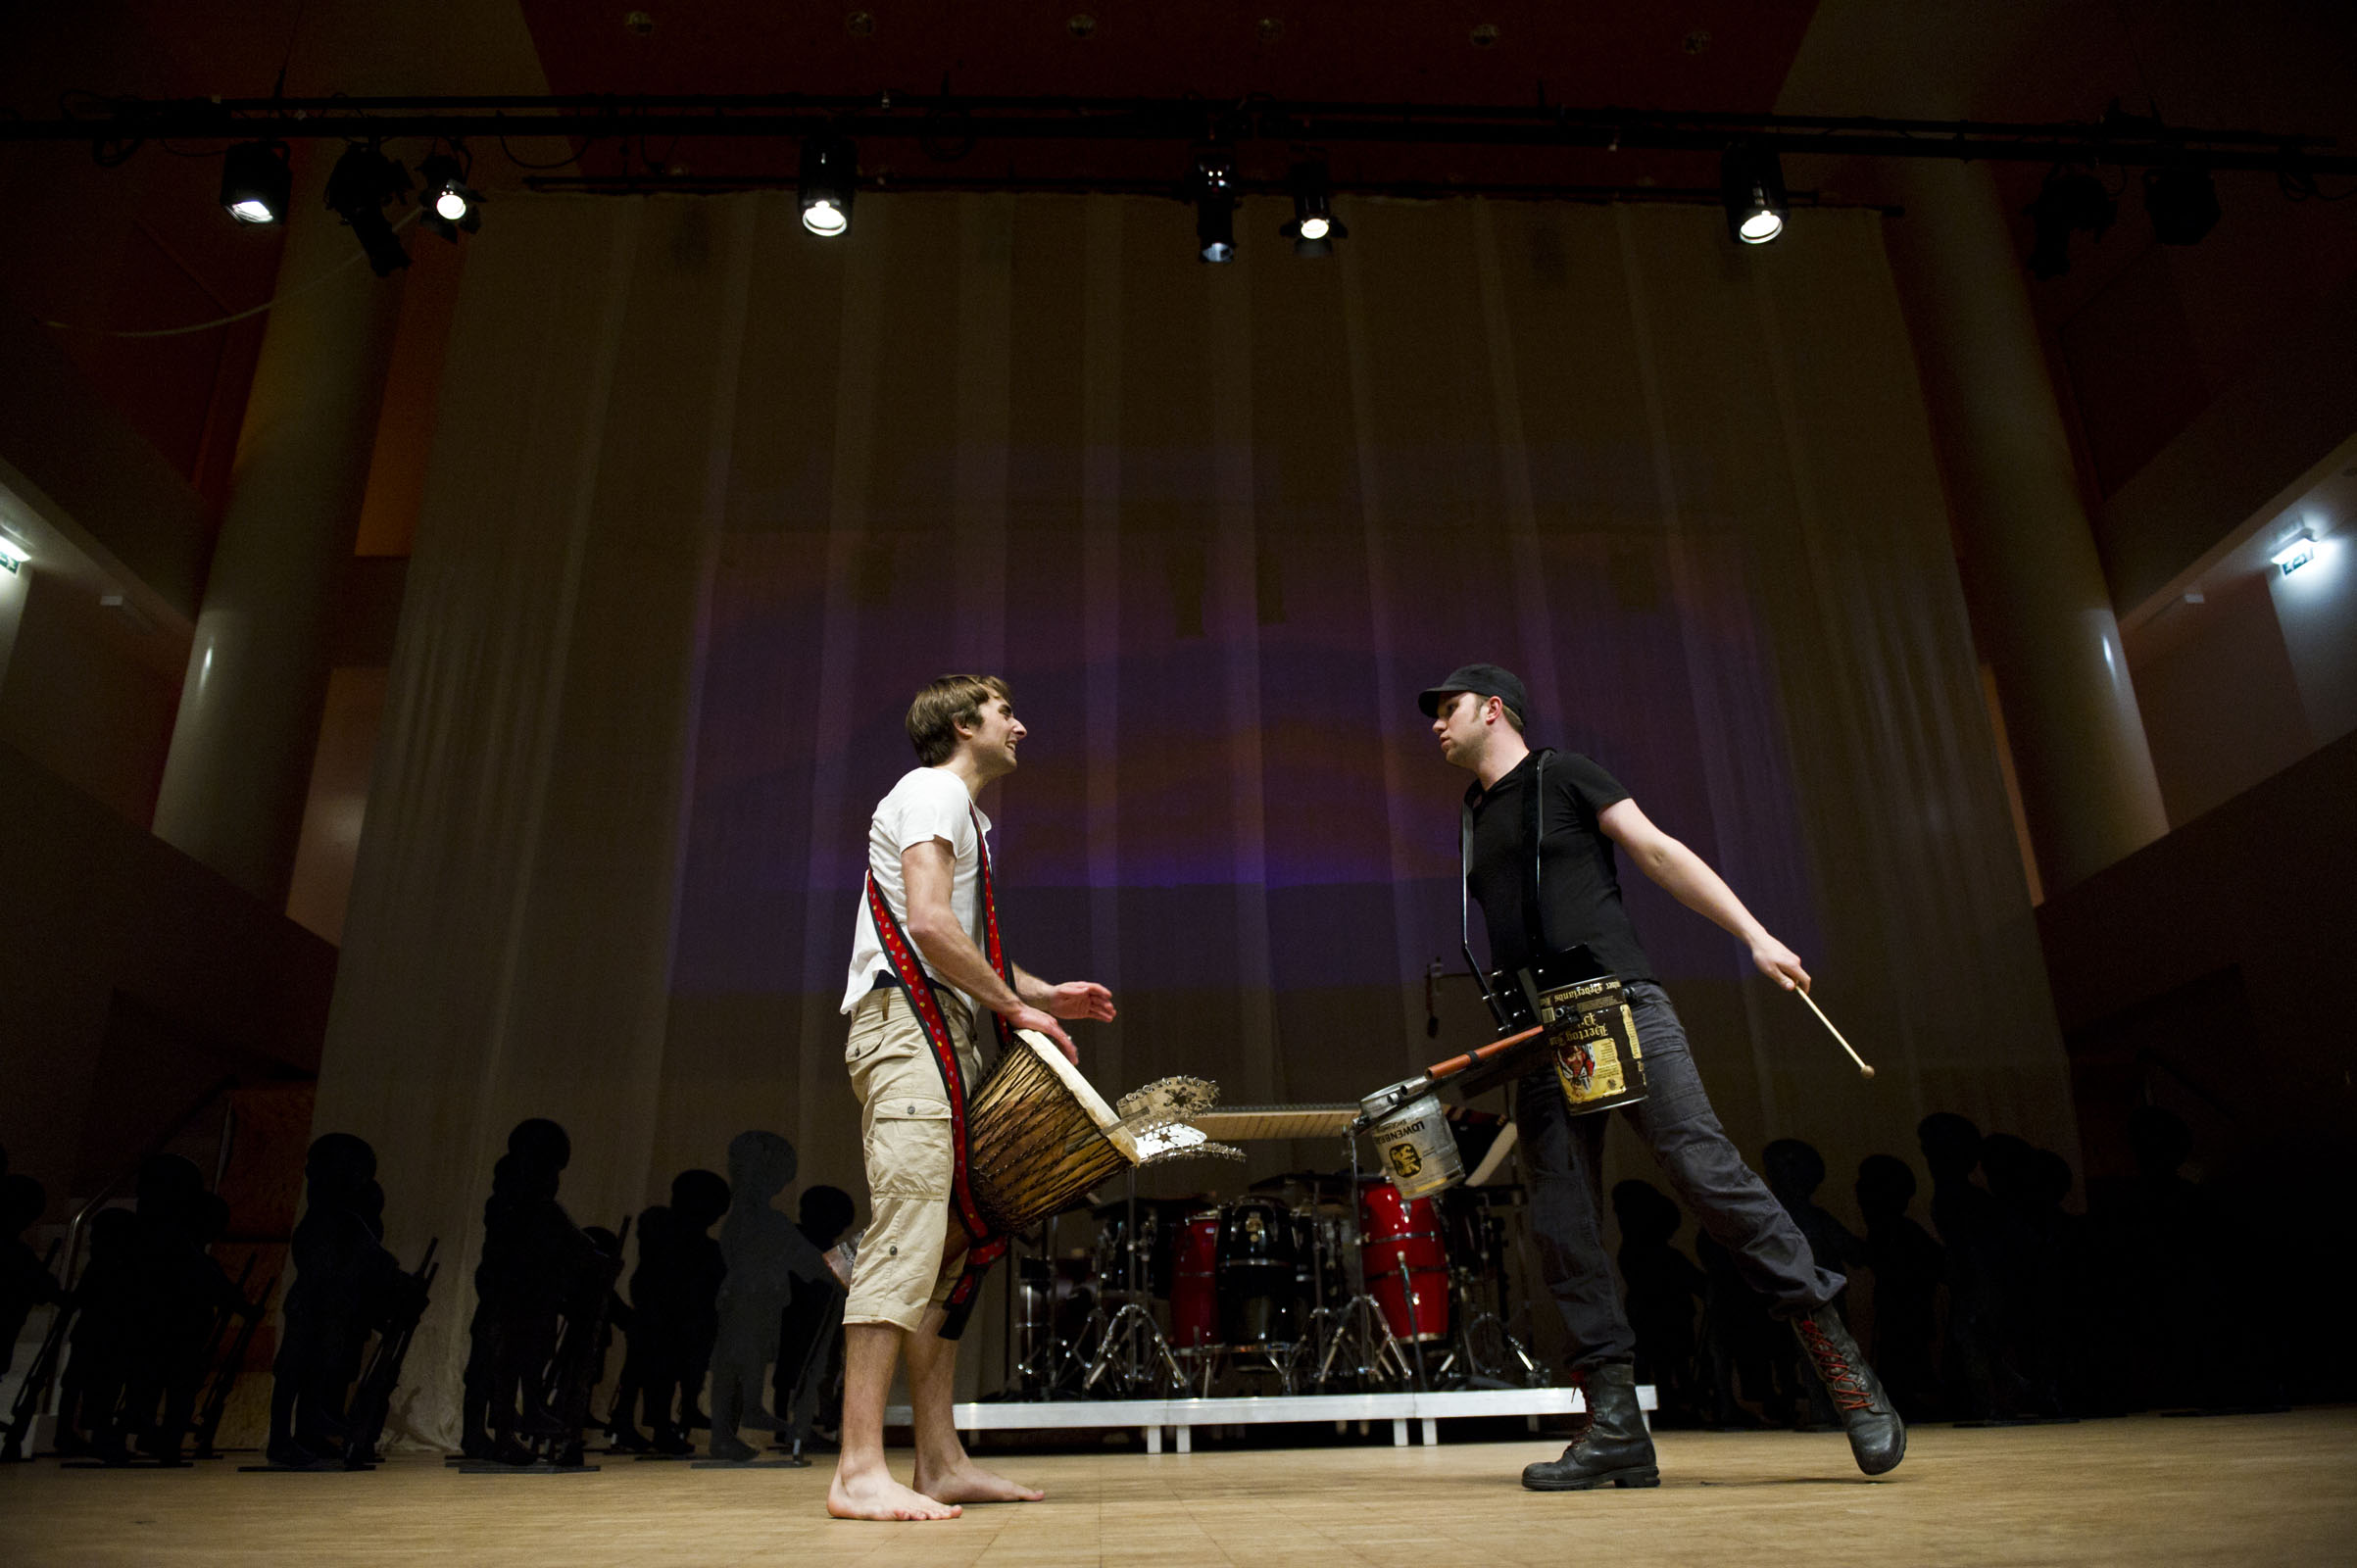 djembe player Dominique Vleeshouwers and percussion player Rob van der Sterre on stage for Kindsoldaat